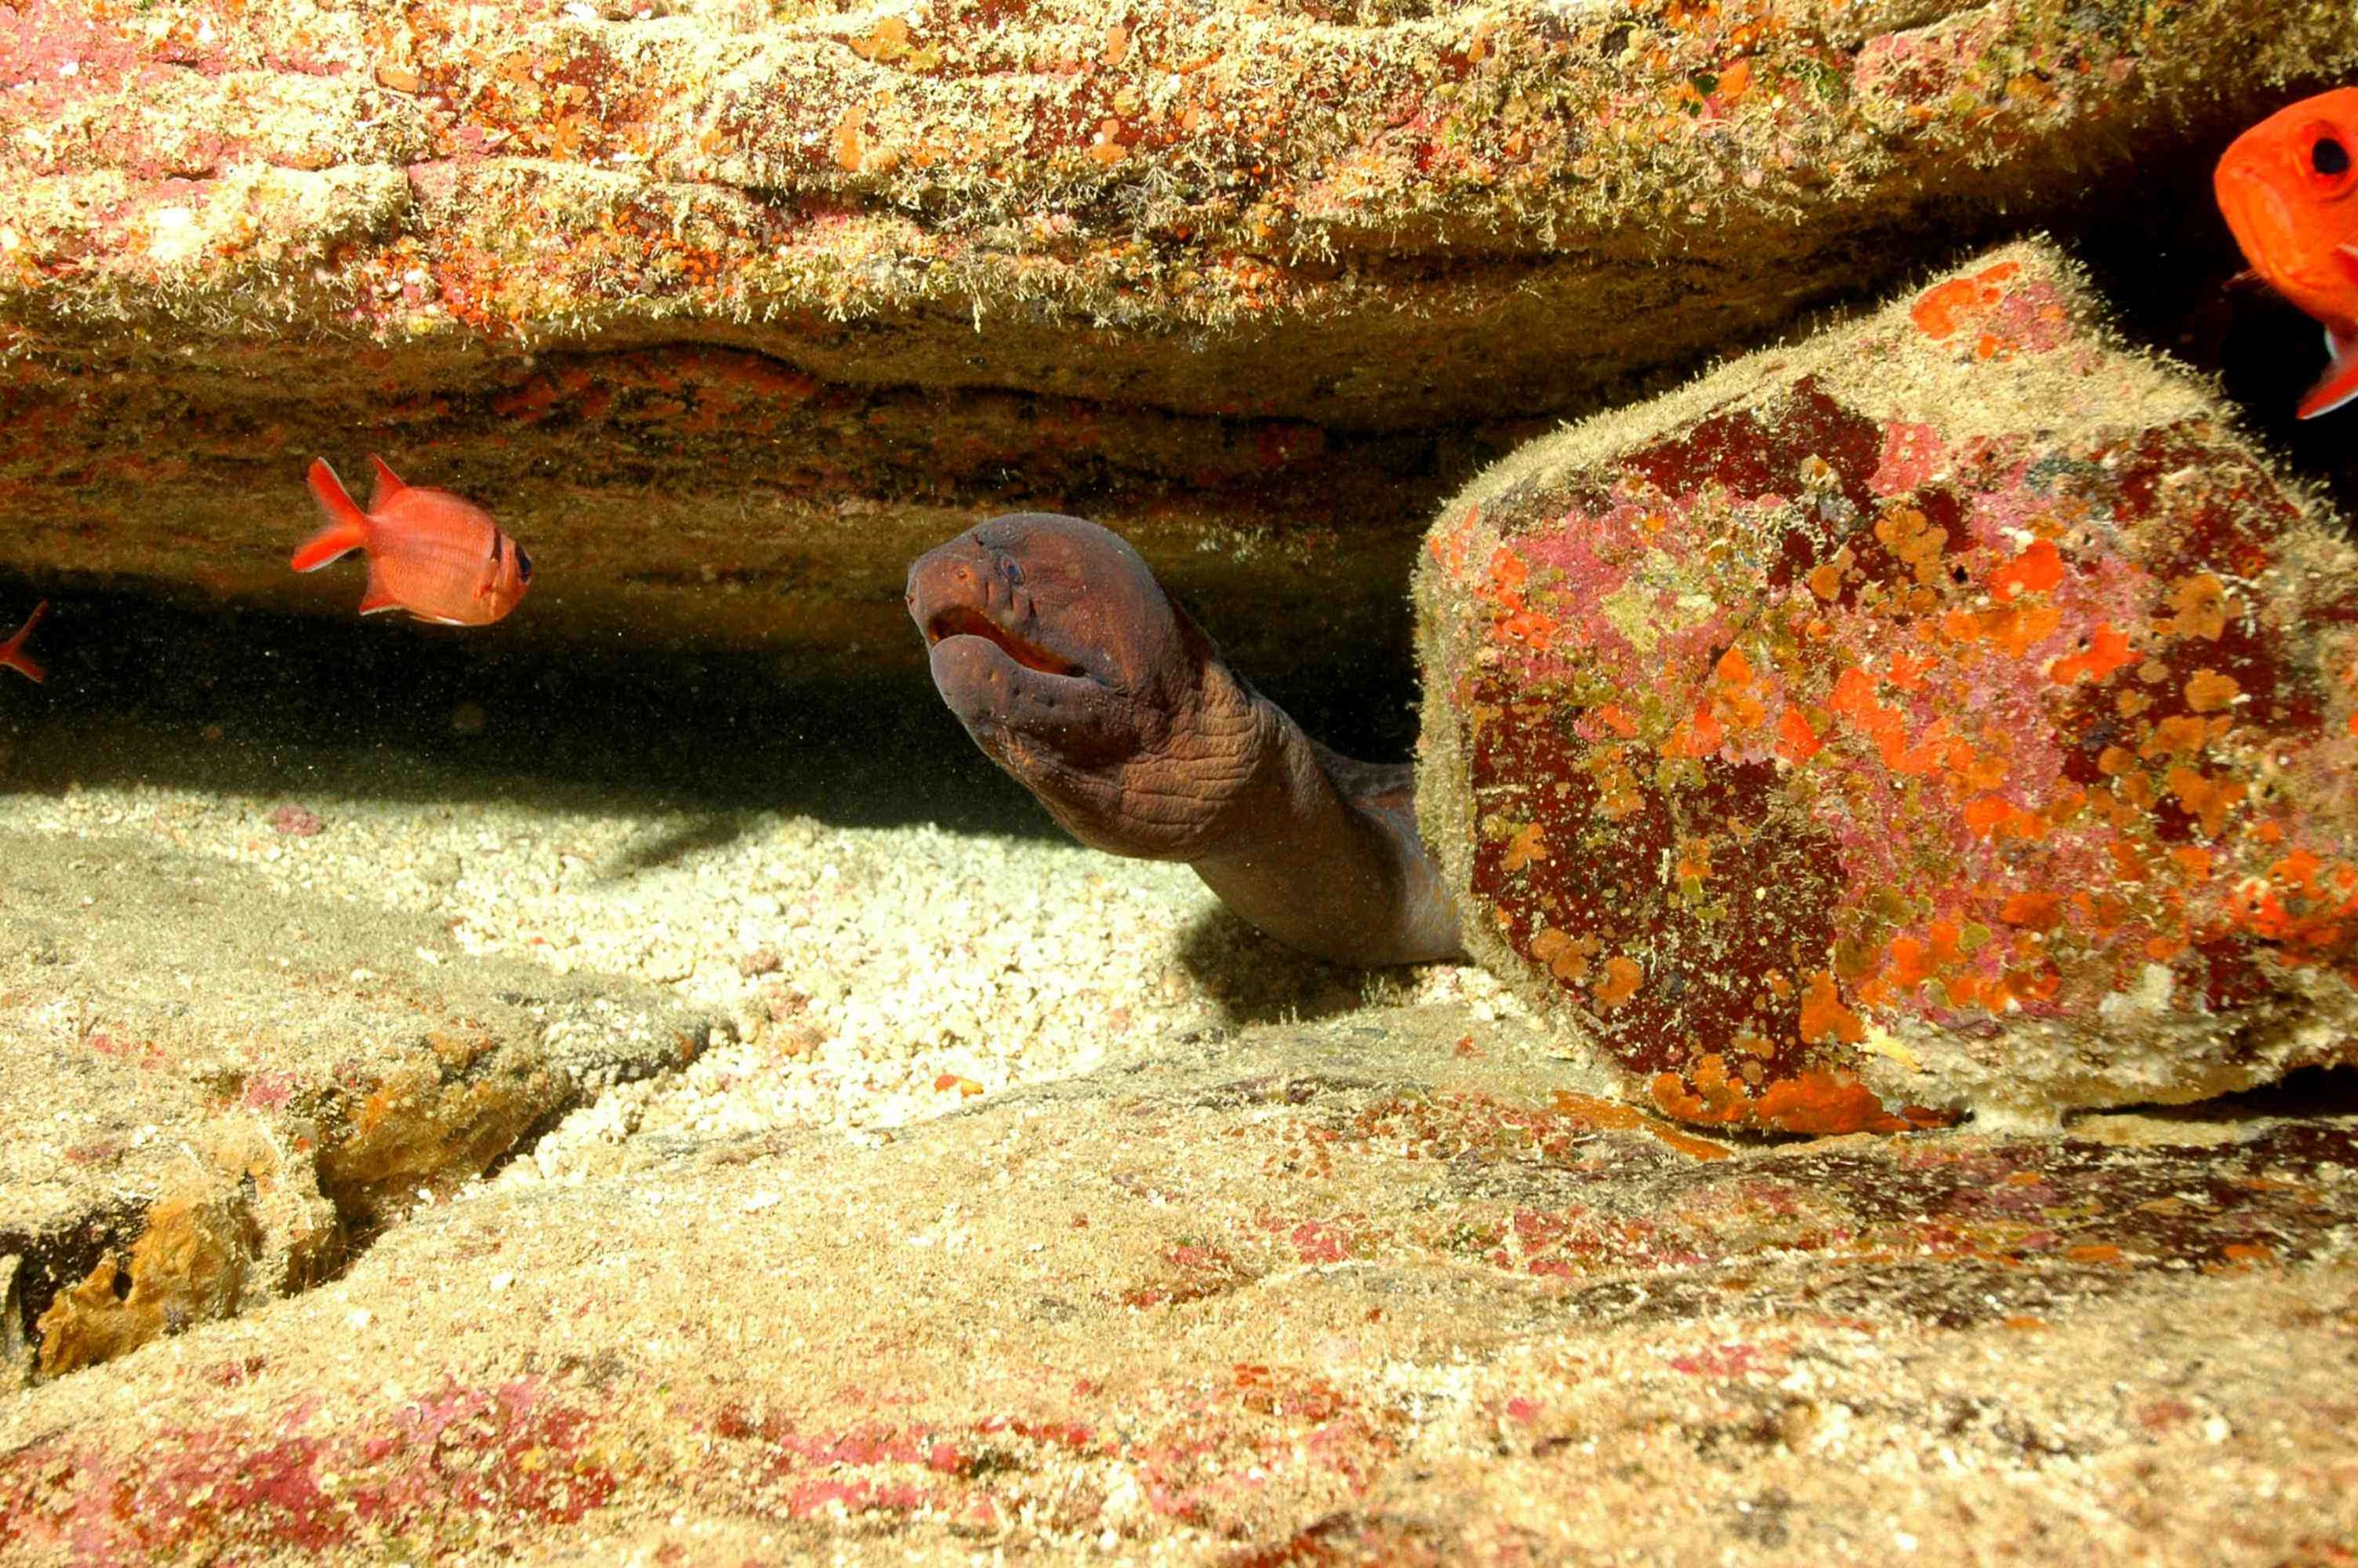 Another Moray by Terry Goldie